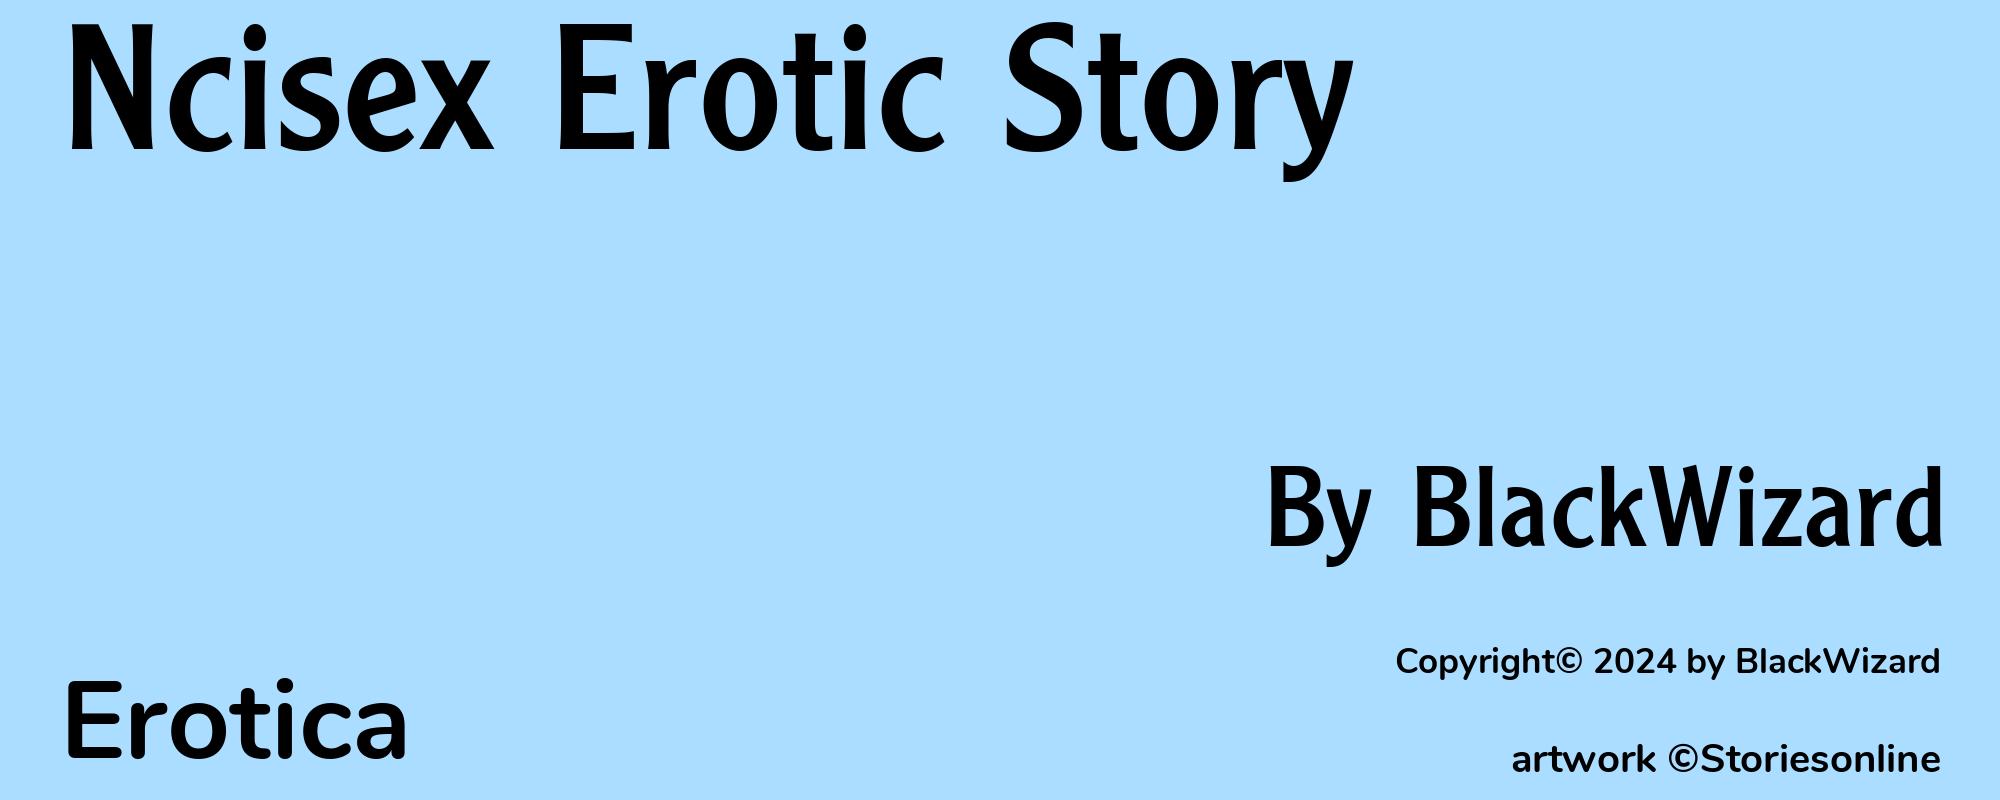 Ncisex Erotic Story  - Cover